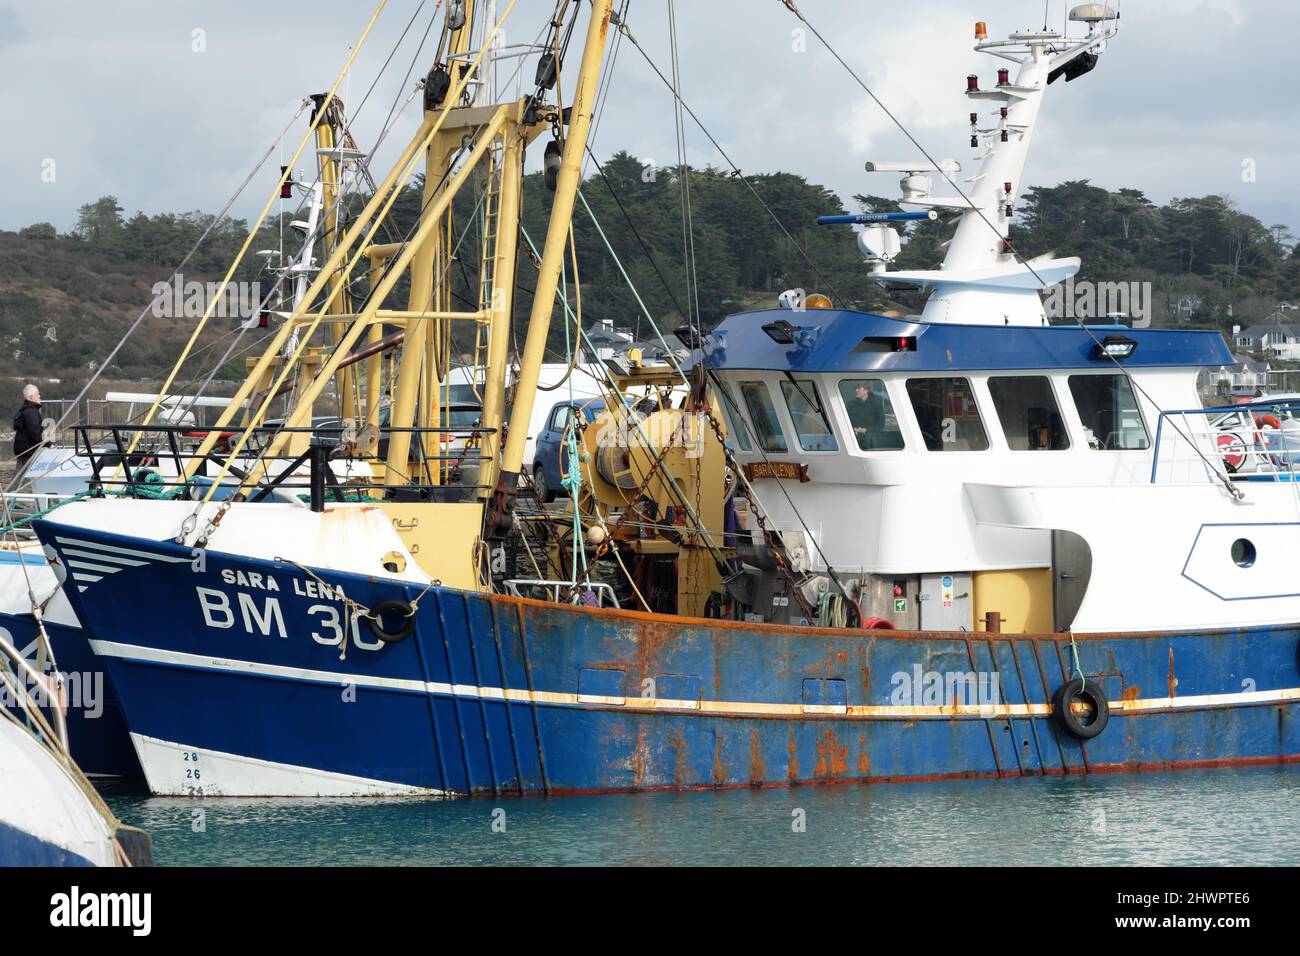 Padstow Cornwall UK fishing boats moored in the harbour - shown here BM 30 Sara Lena a trawler from Brixham Stock Photo